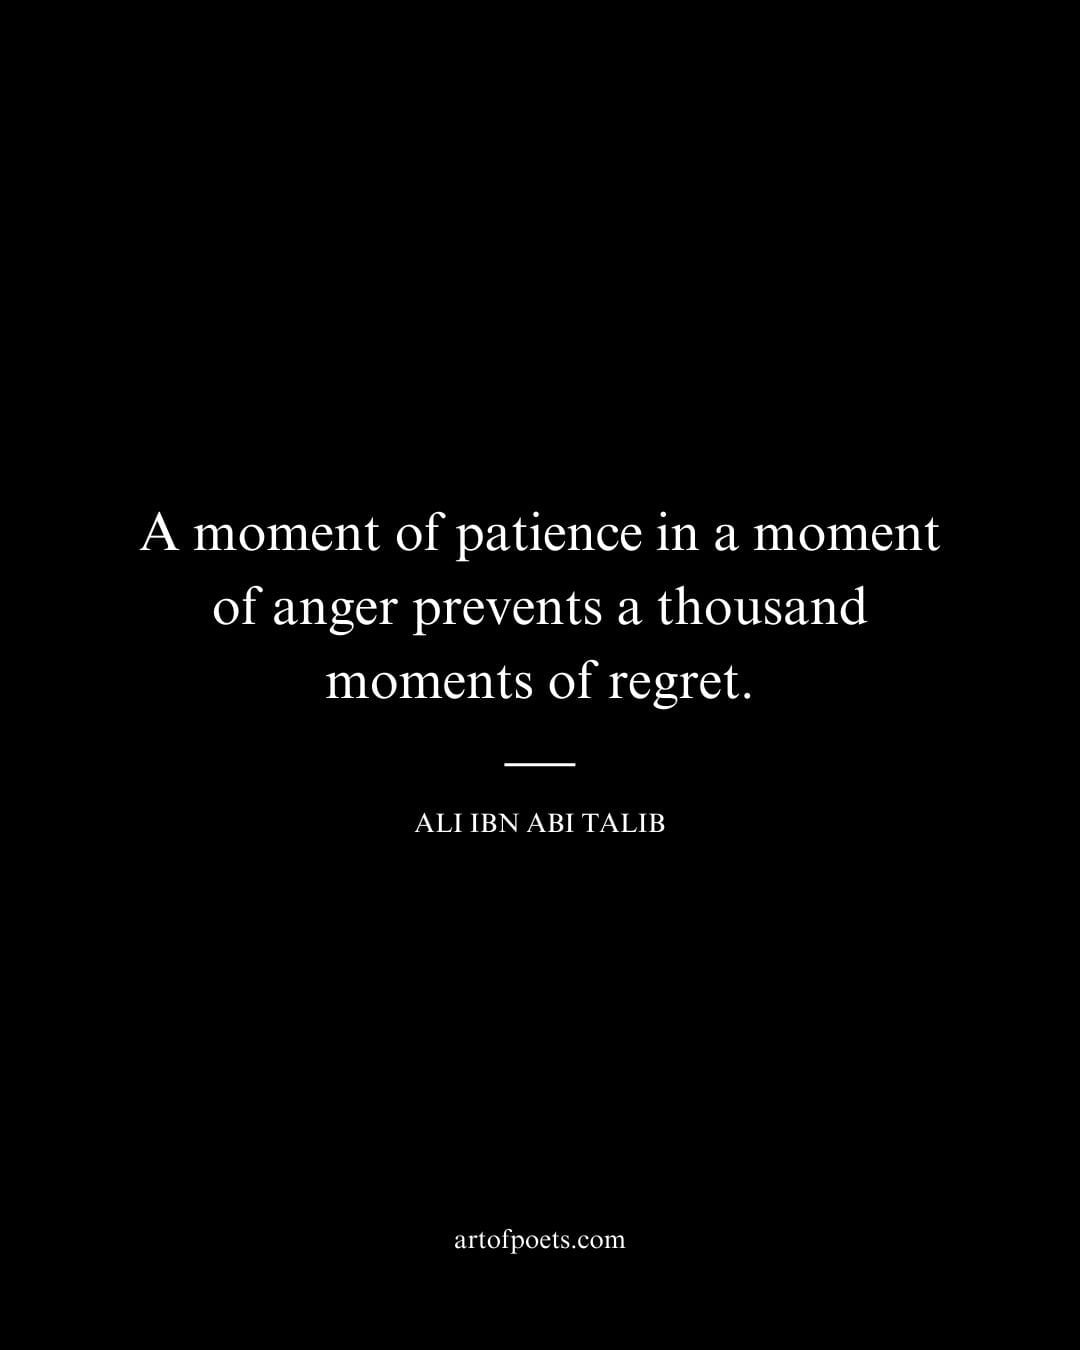 A moment of patience in a moment of anger prevents a thousand moments of regret